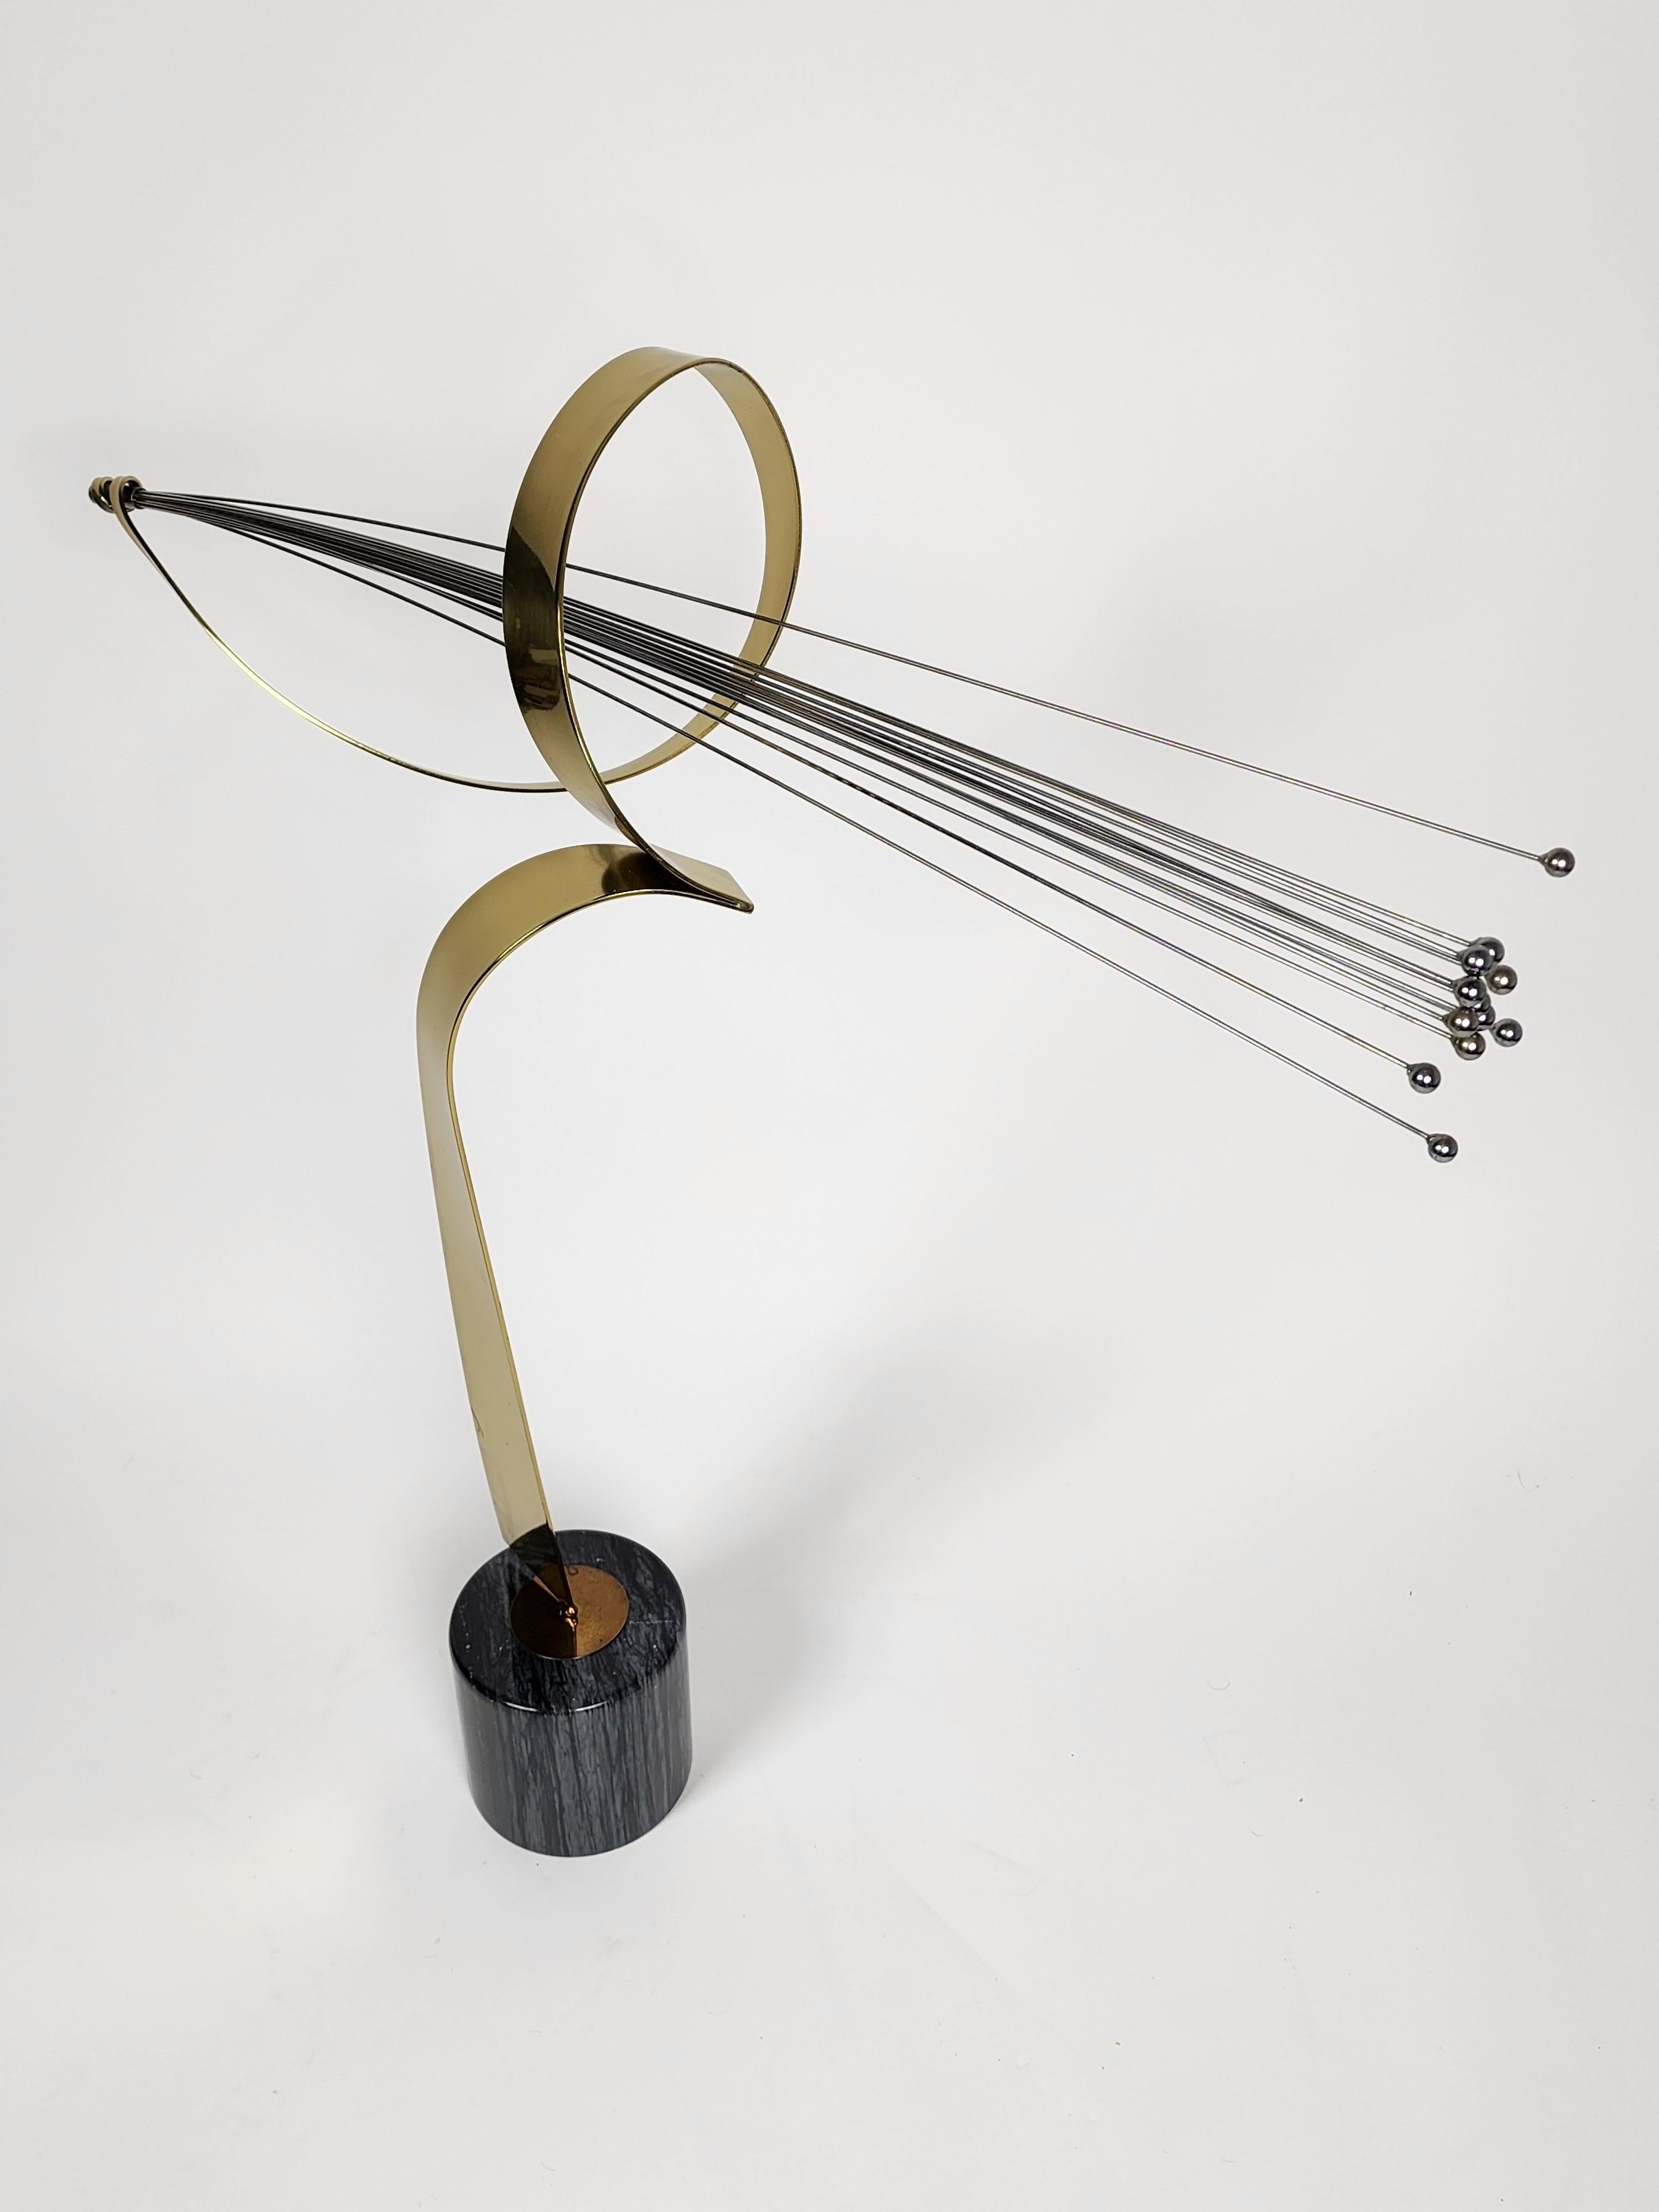 Elegant, fluid, bold brass sculpture with chrome rods from Curtis Jere evoquing a shooting star with its trail fo light. 

The rotating structure sit on a polished marble base.